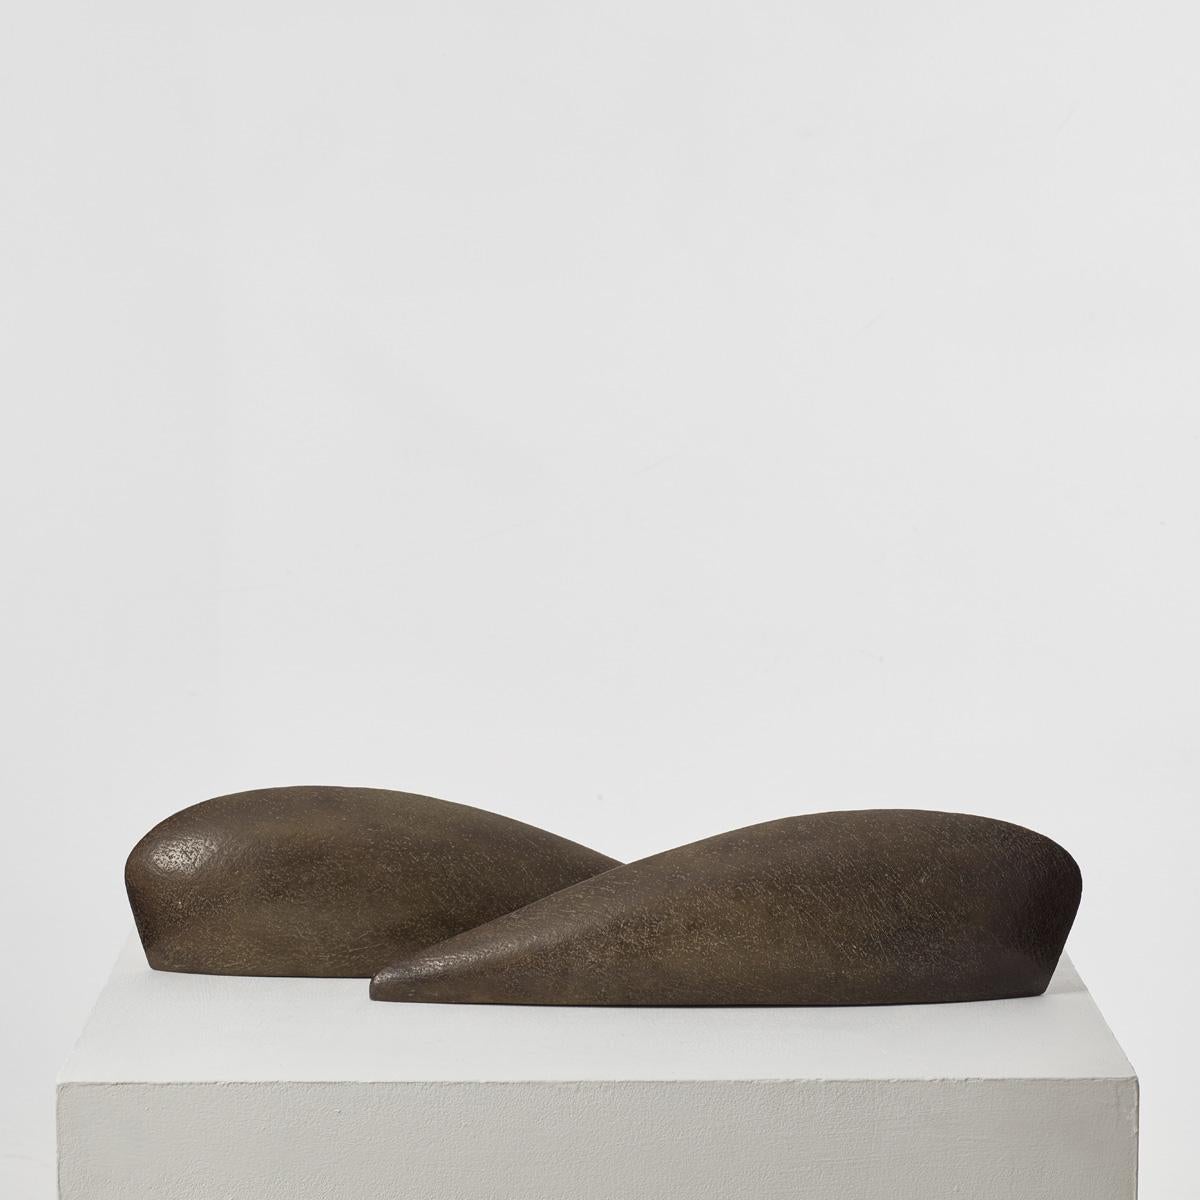 British Pair of Abstract Mound Sculptures from the Collection of Sir Terence Conran